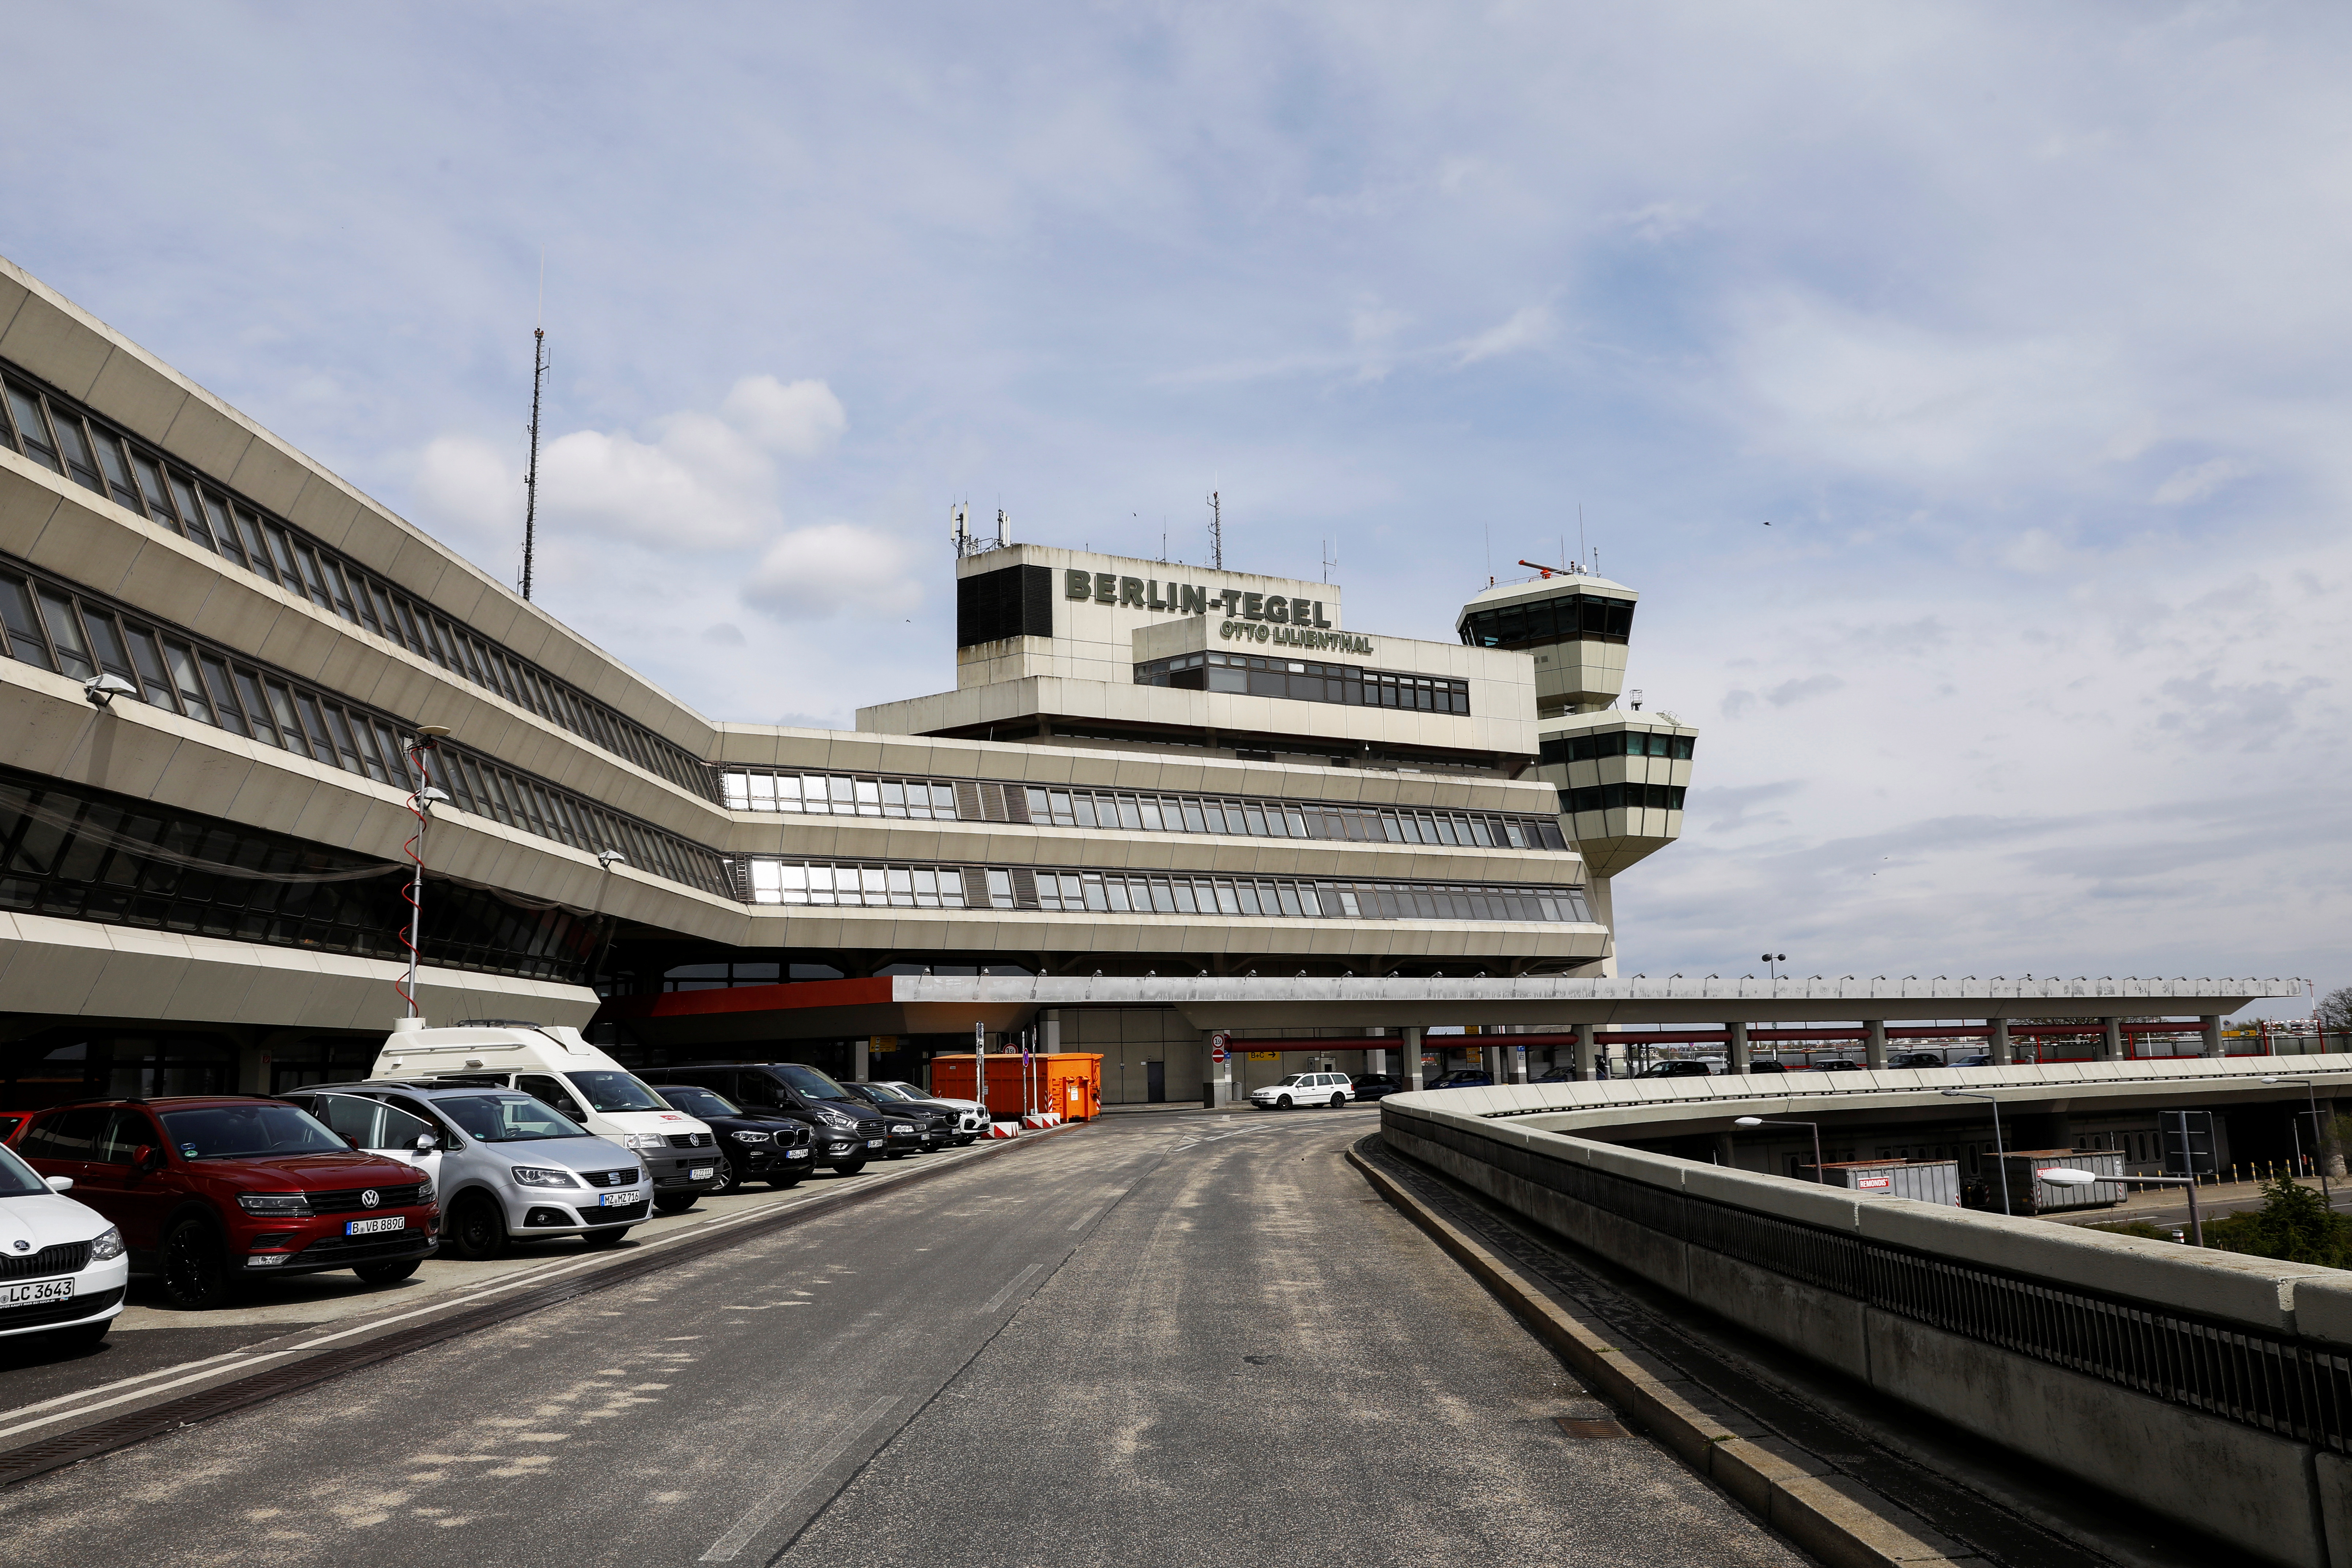 The main building and the Control Tower are seen during the media tour at the former Berlin Tegel airport, as the city's authorities are planning to build there more than 5,000 apartments, in Berlin, Germany May 4, 2021. REUTERS/Michele Tantussi